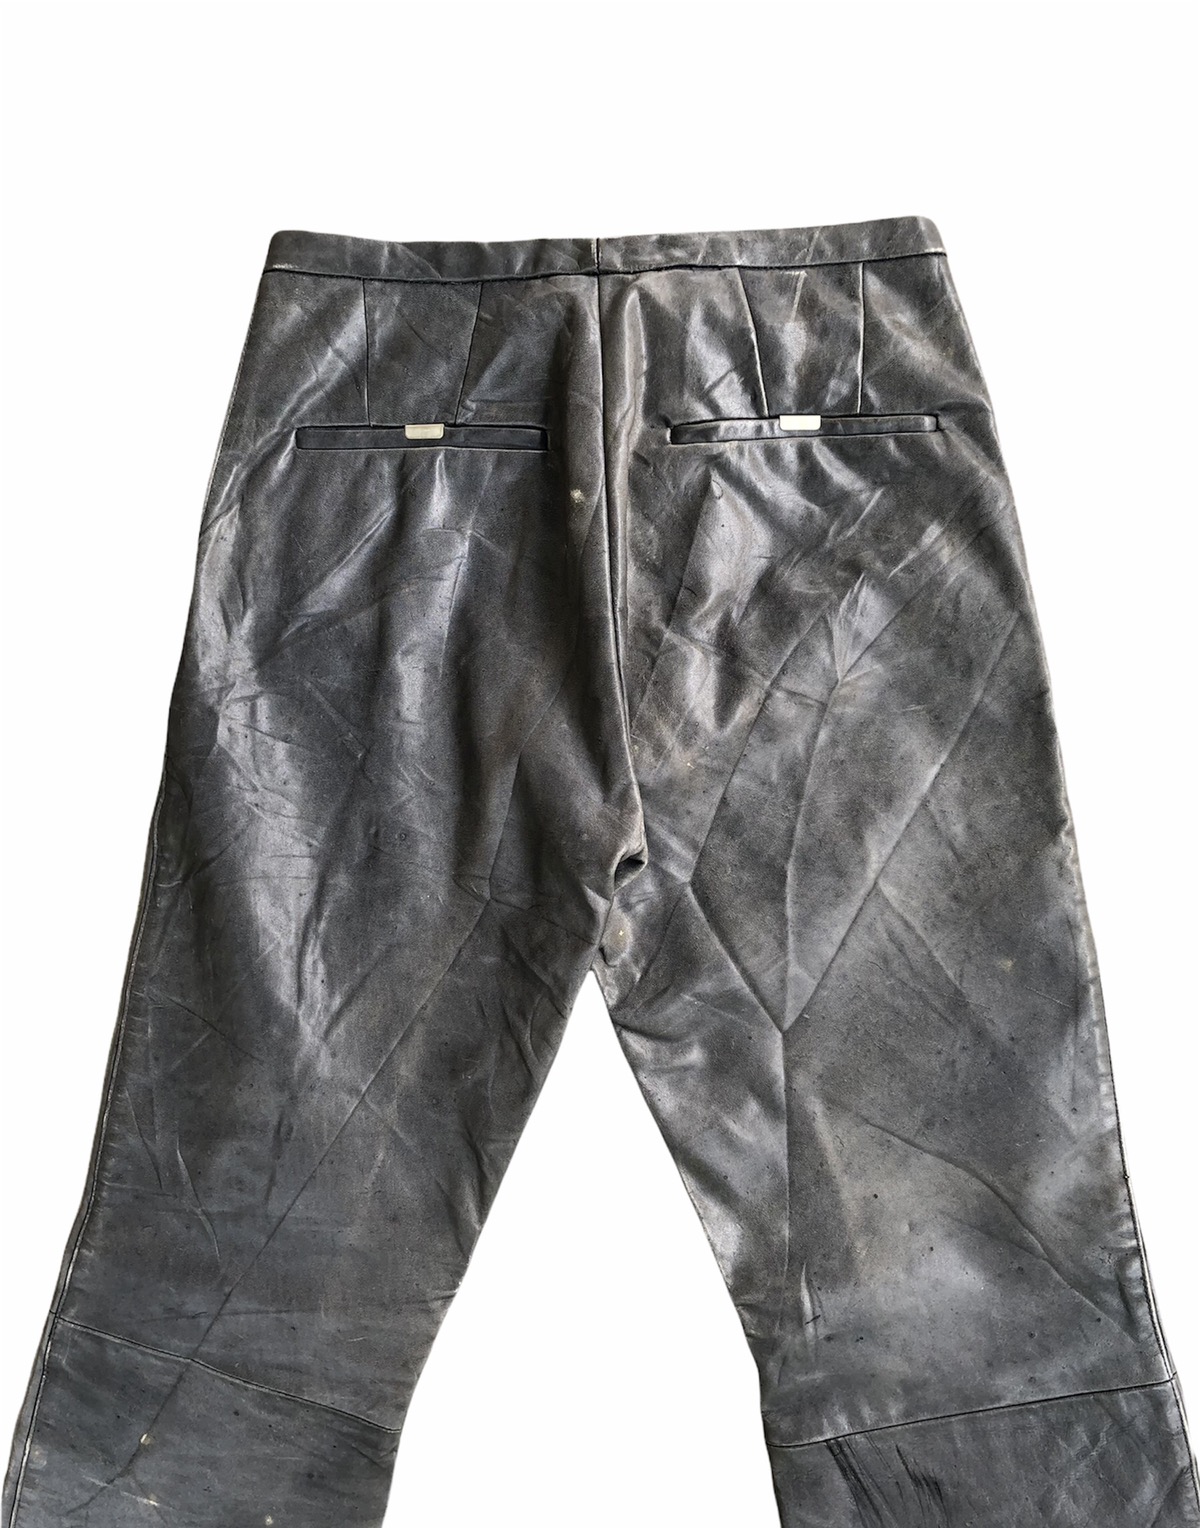 🔥CAROL CHRISTIAN POELL FALL 00-01 LEATHER TROUSER - 7